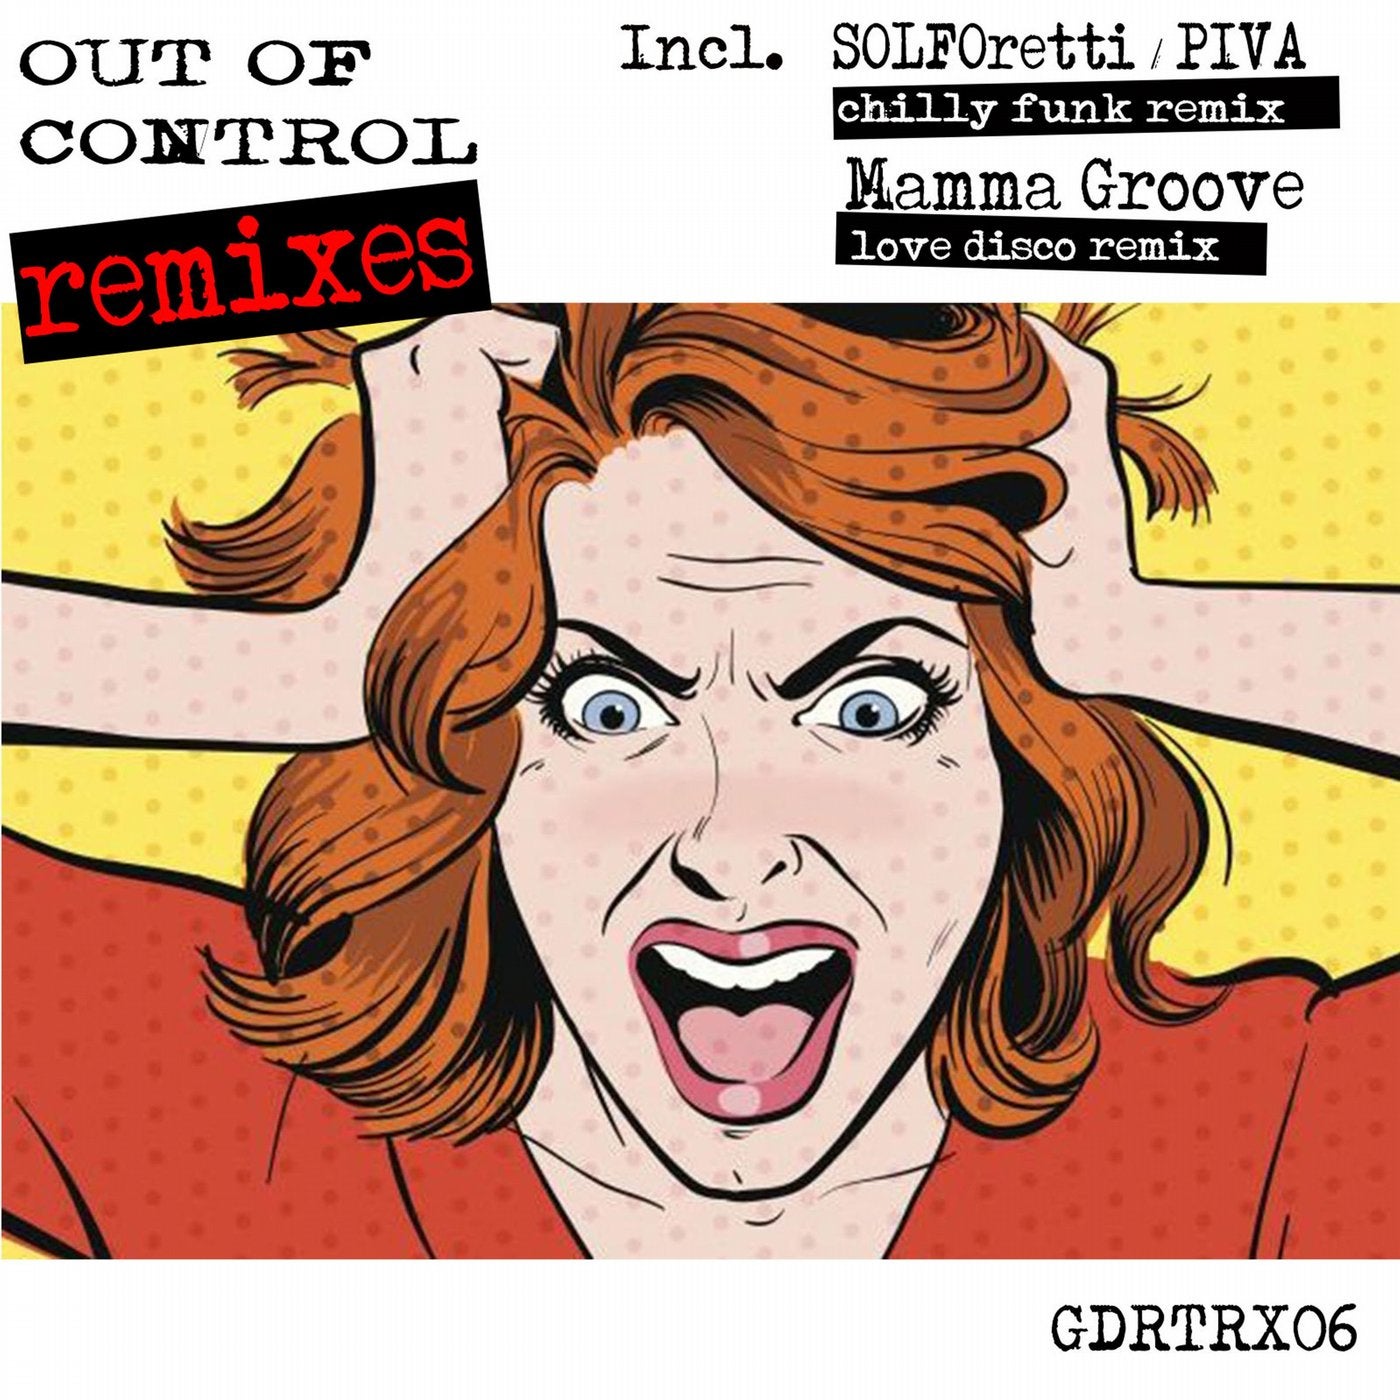 Out of Control Remixes